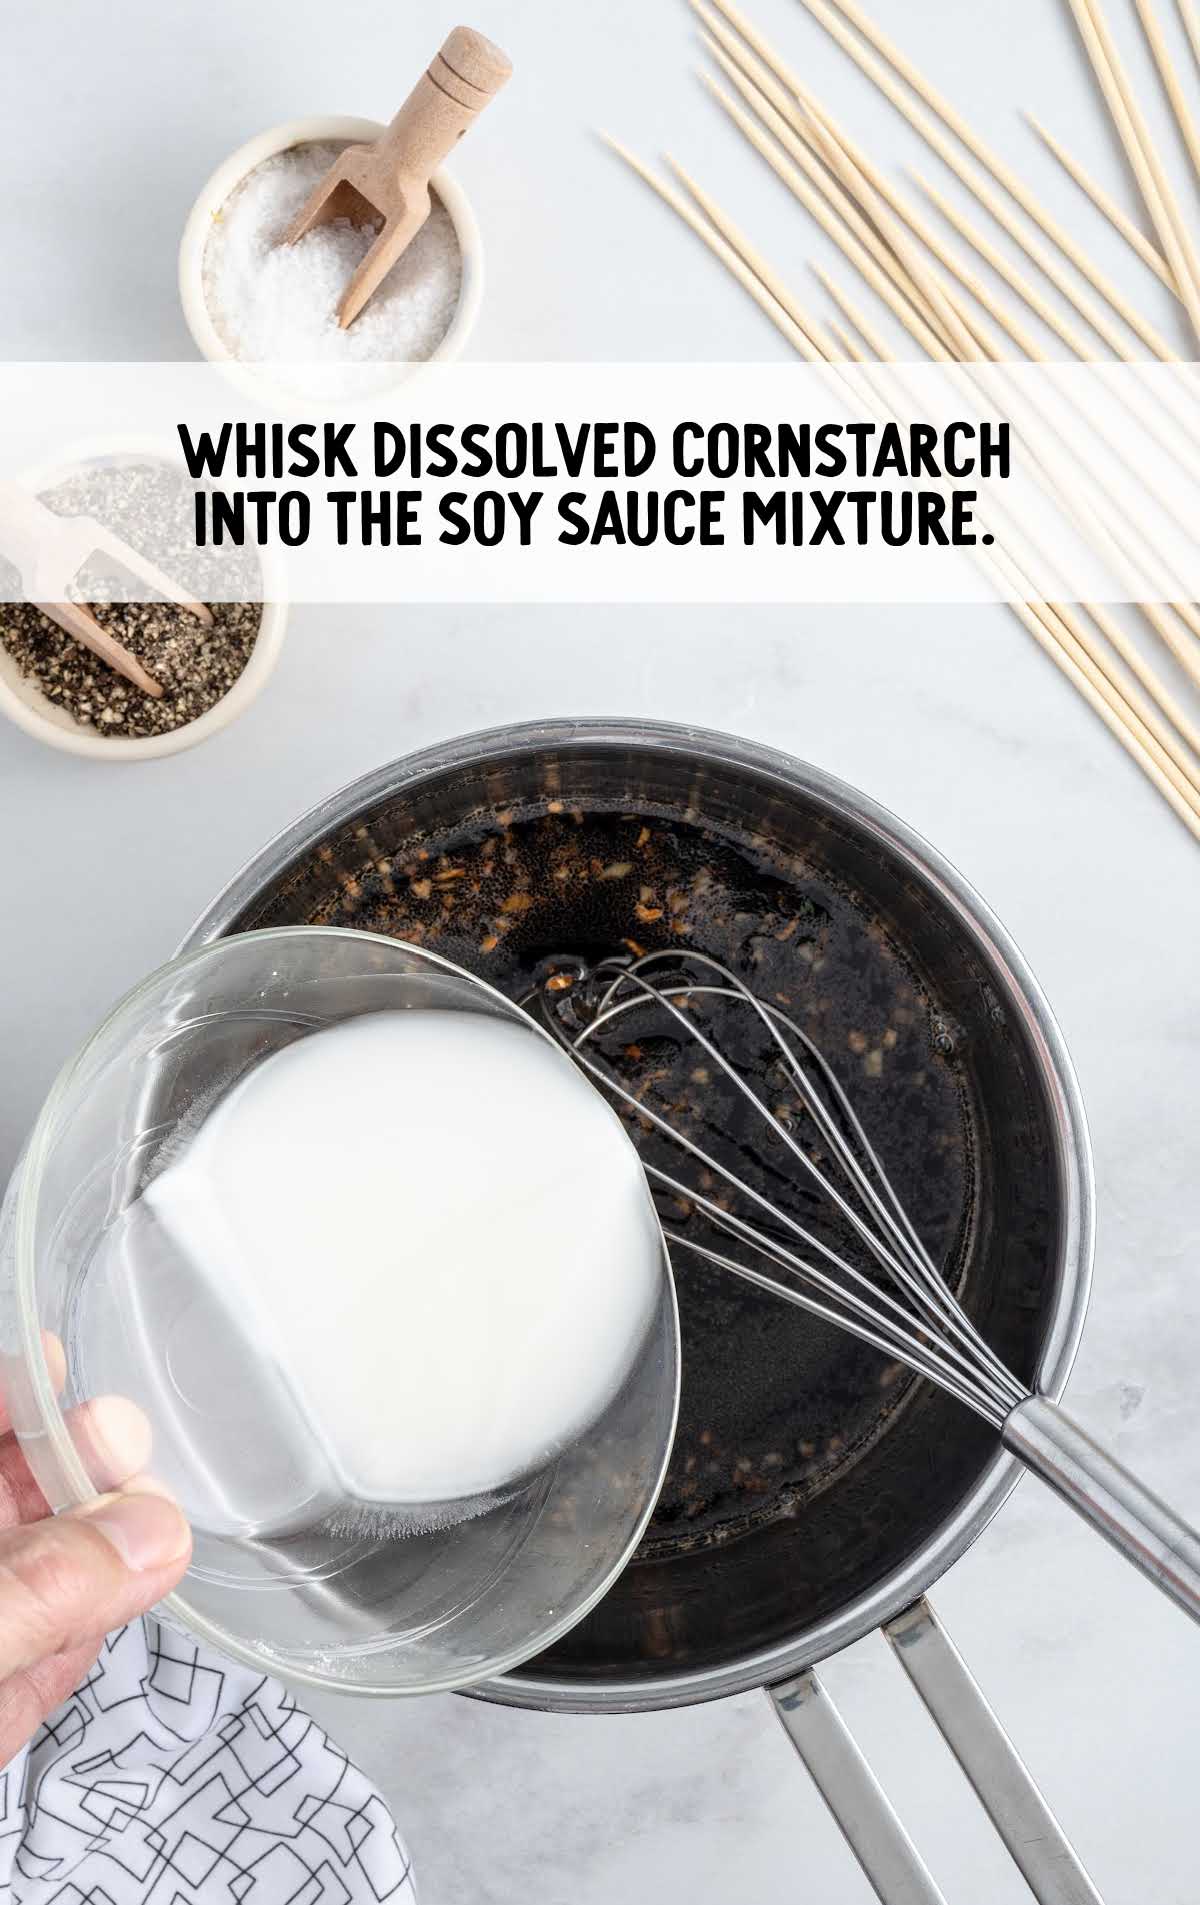 cornstarch dissolved into the soy sauce mixture